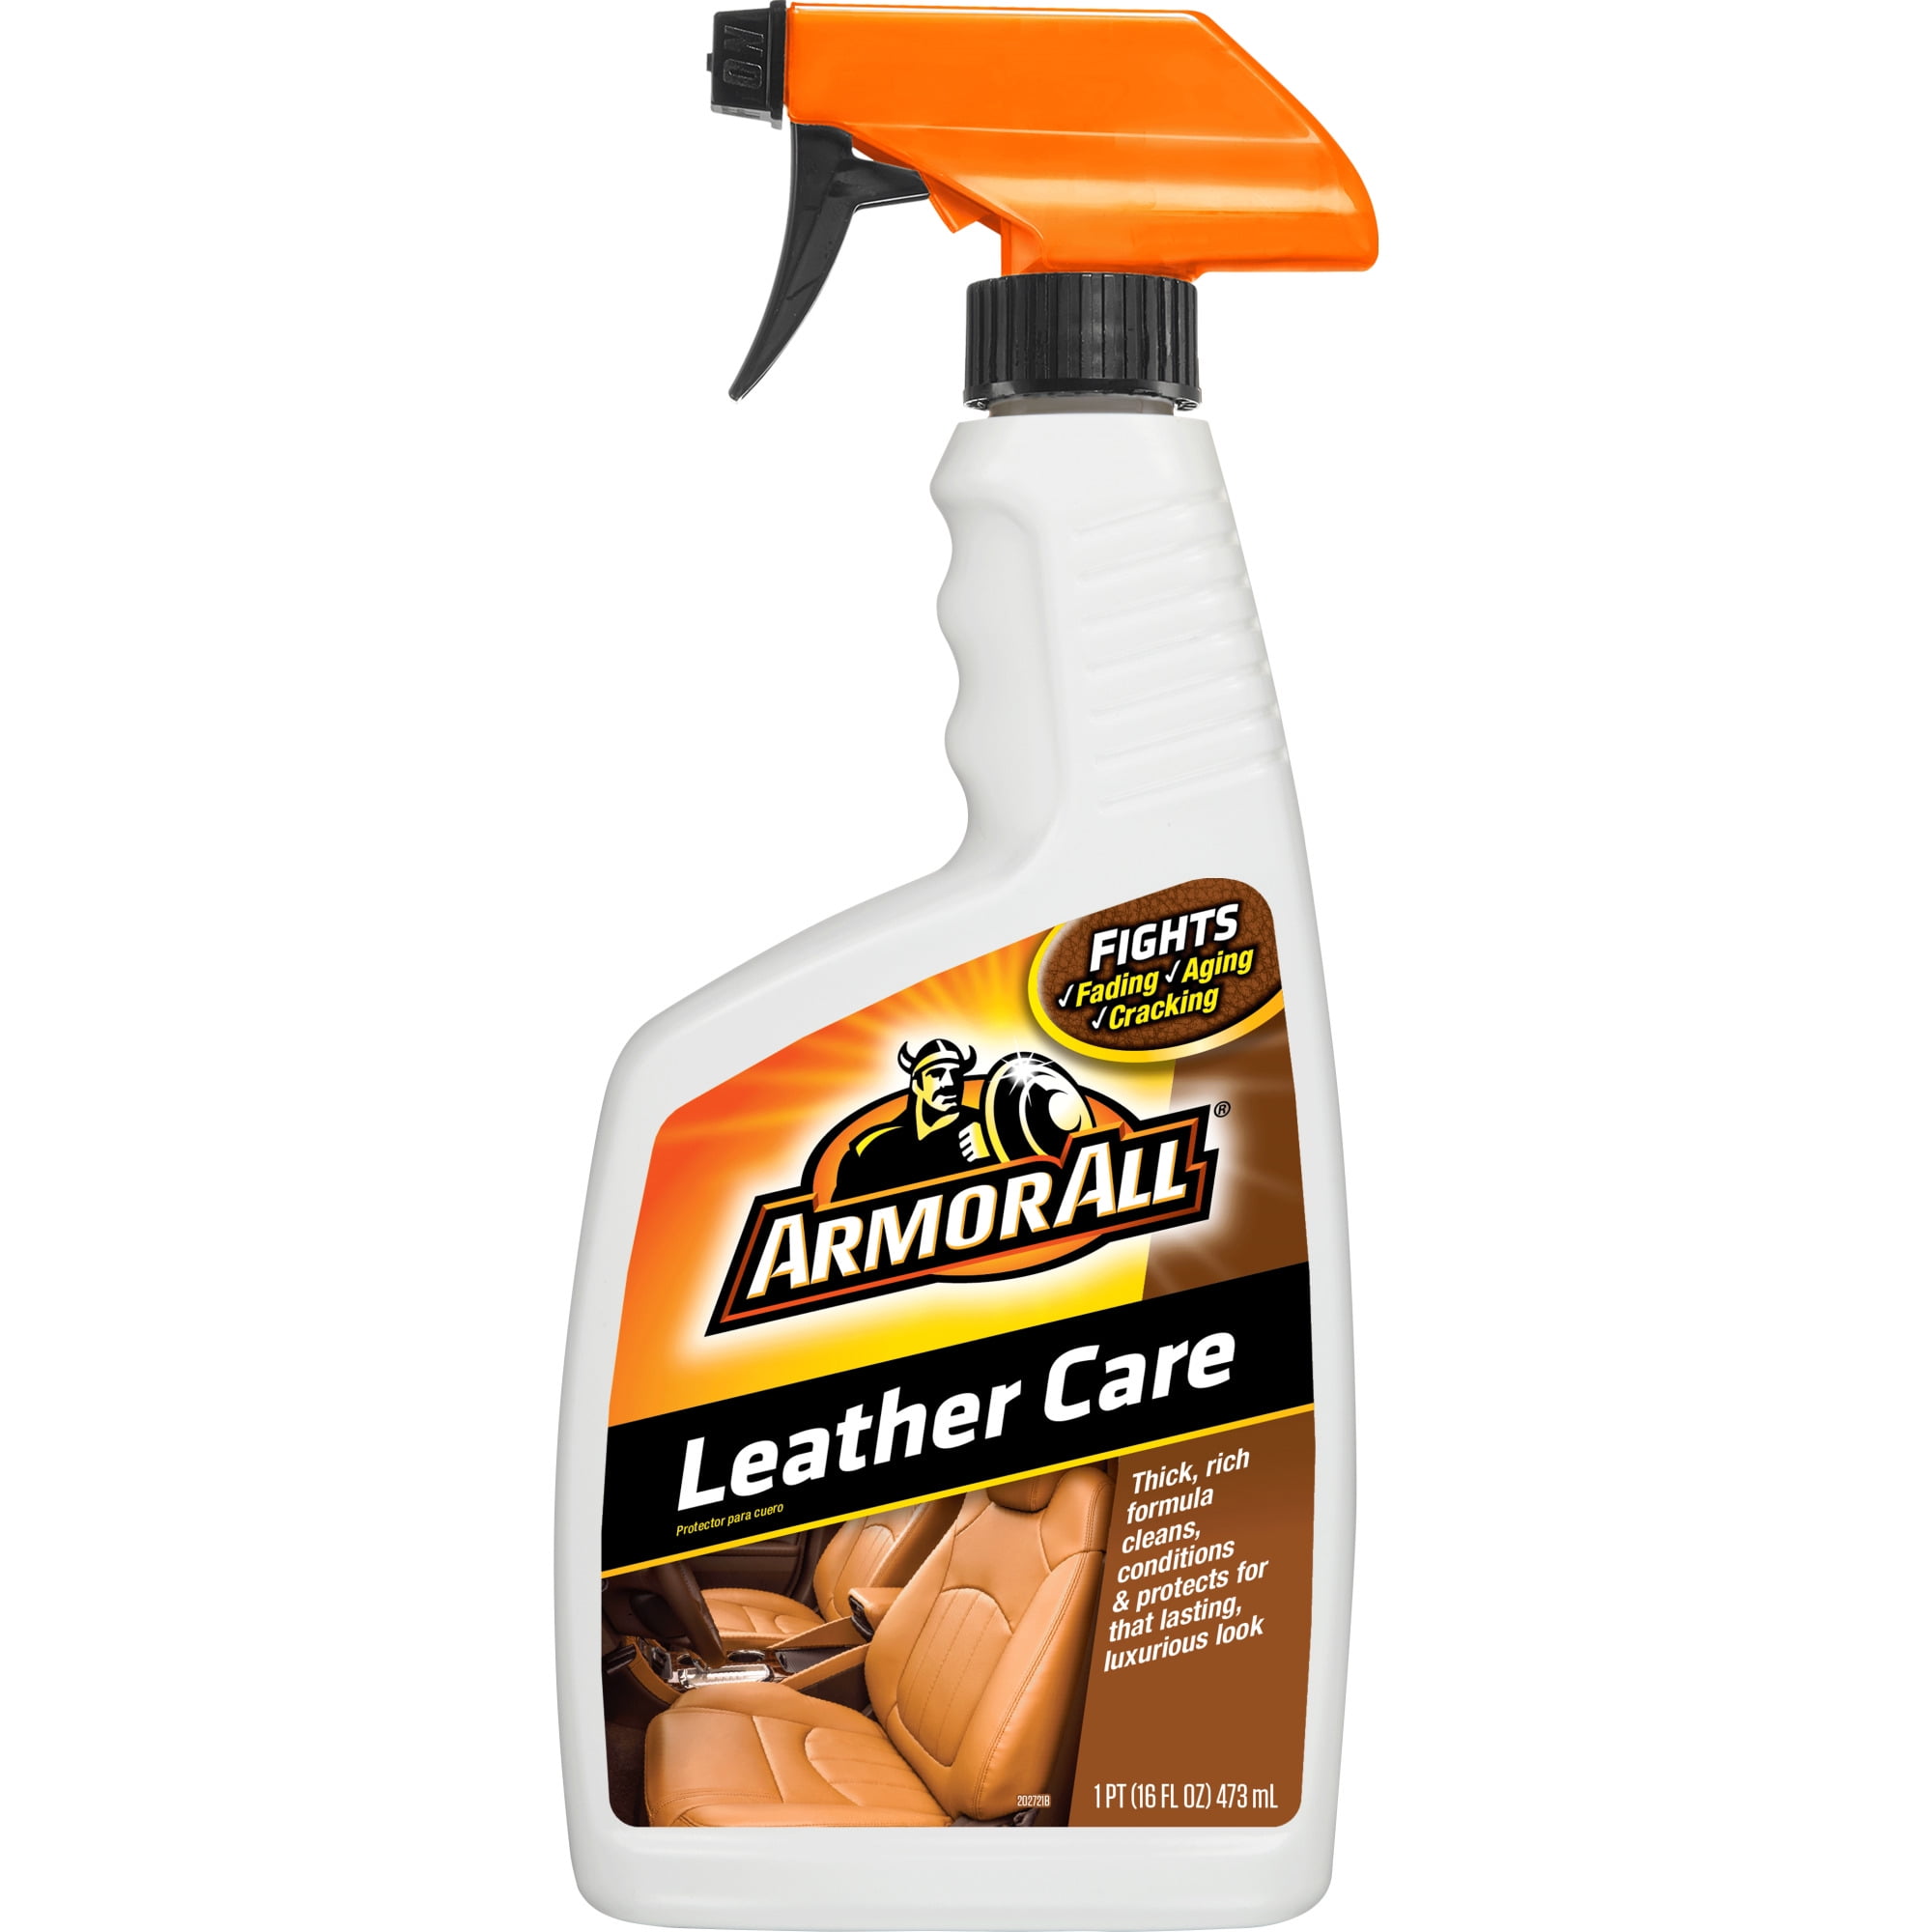 Armor all leather care information